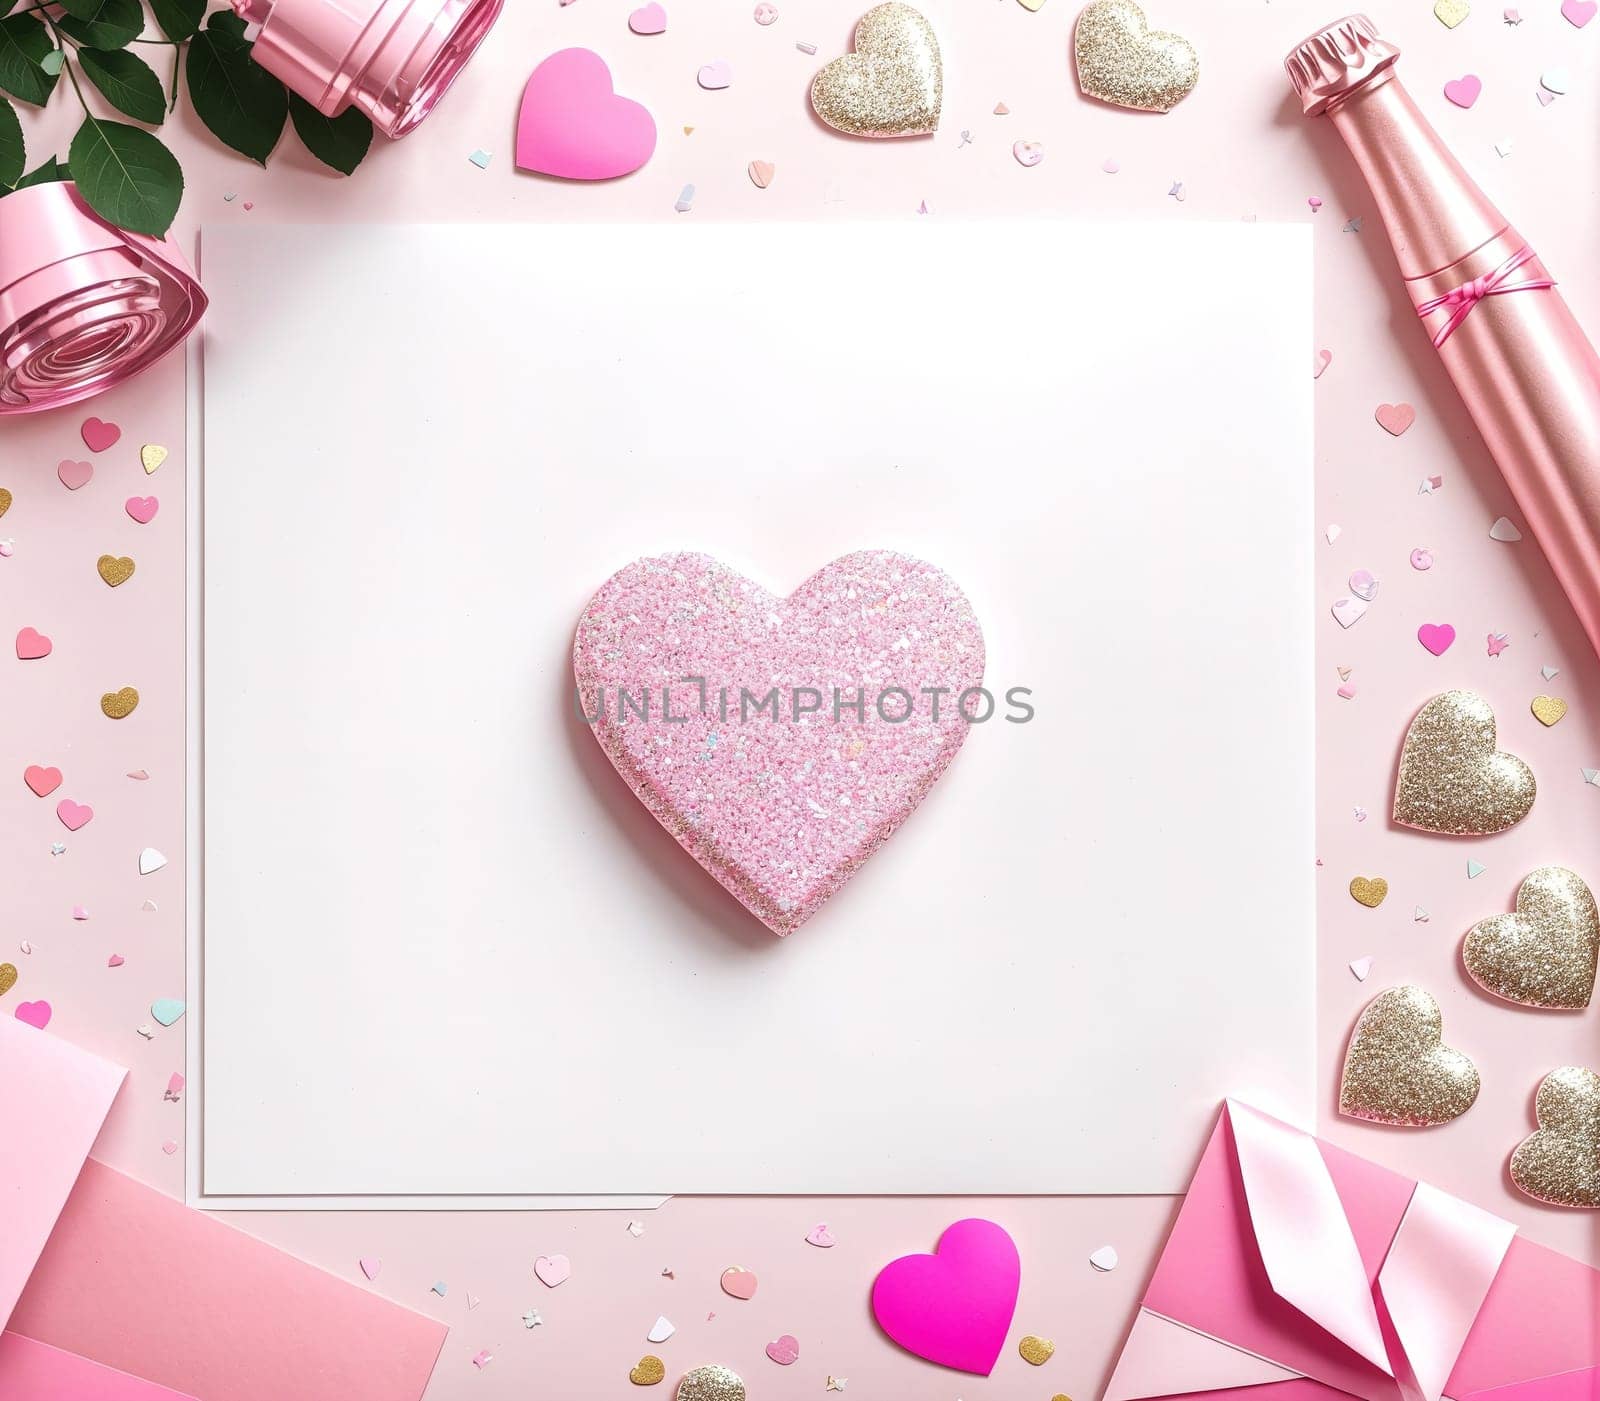 The image is a pink heart with a ribbon tied around it, surrounded by pink and white balloons and confetti.